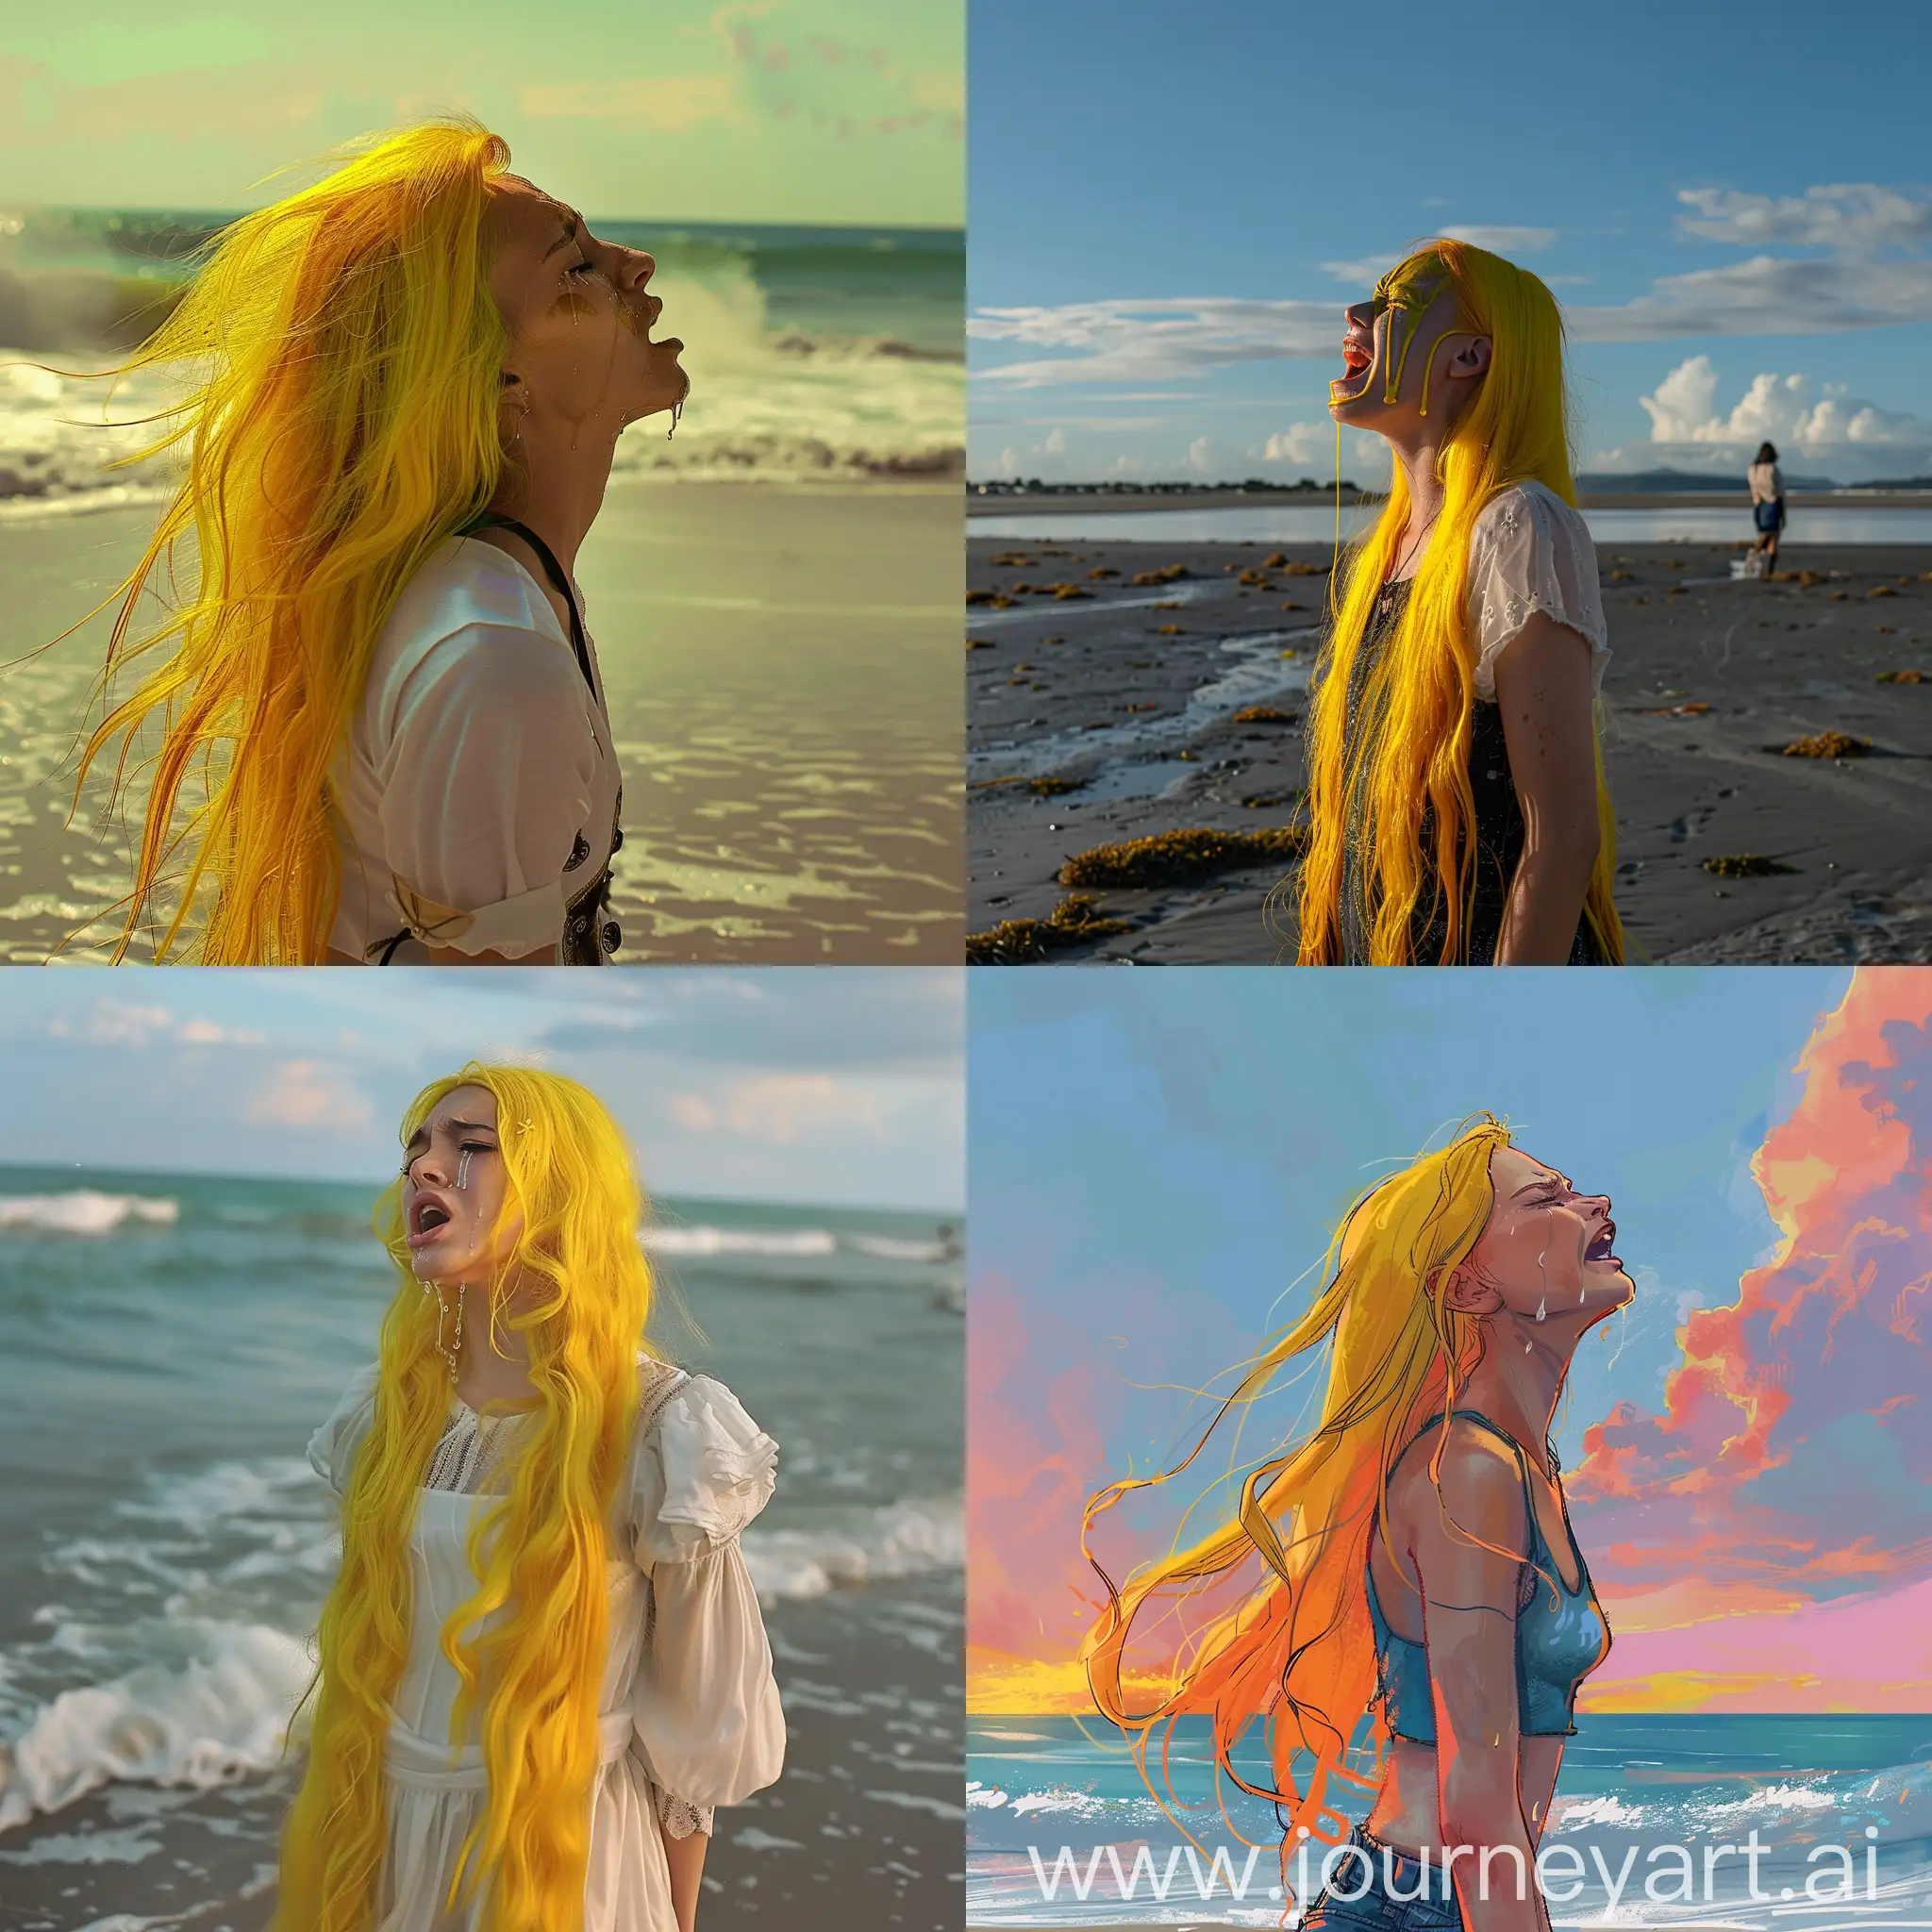 Girl-with-Long-Yellow-Hair-Crying-on-Beach